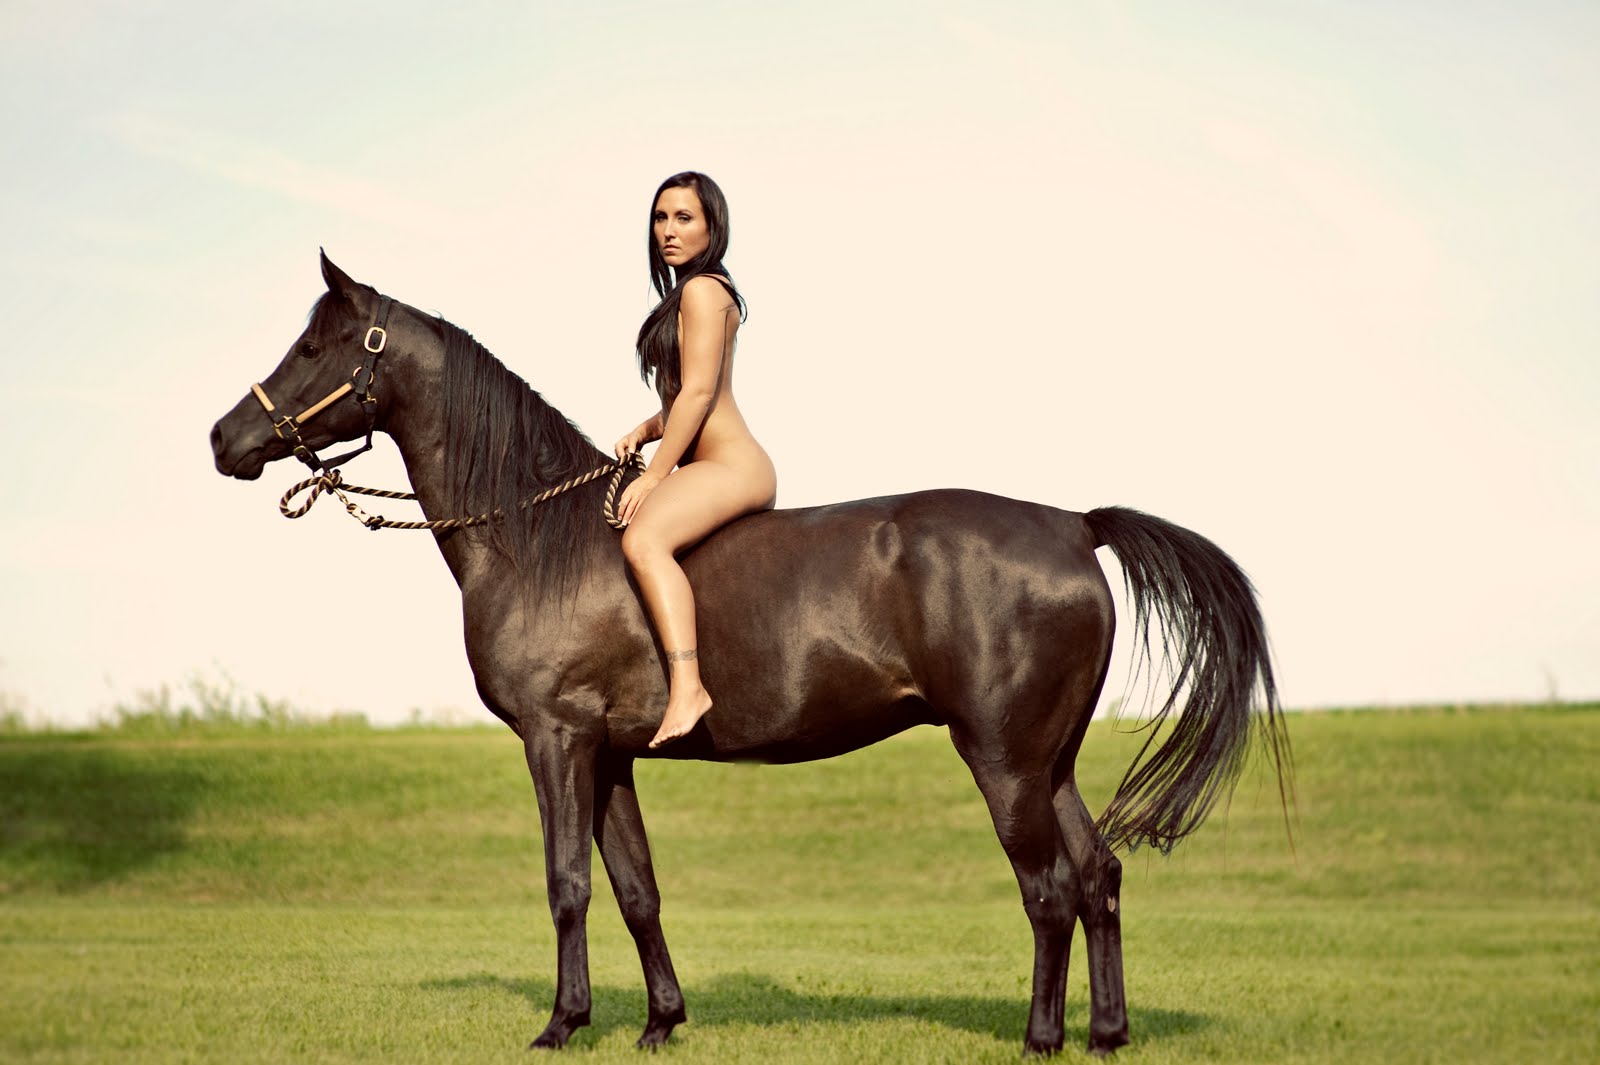 Girl riding on a horse dick